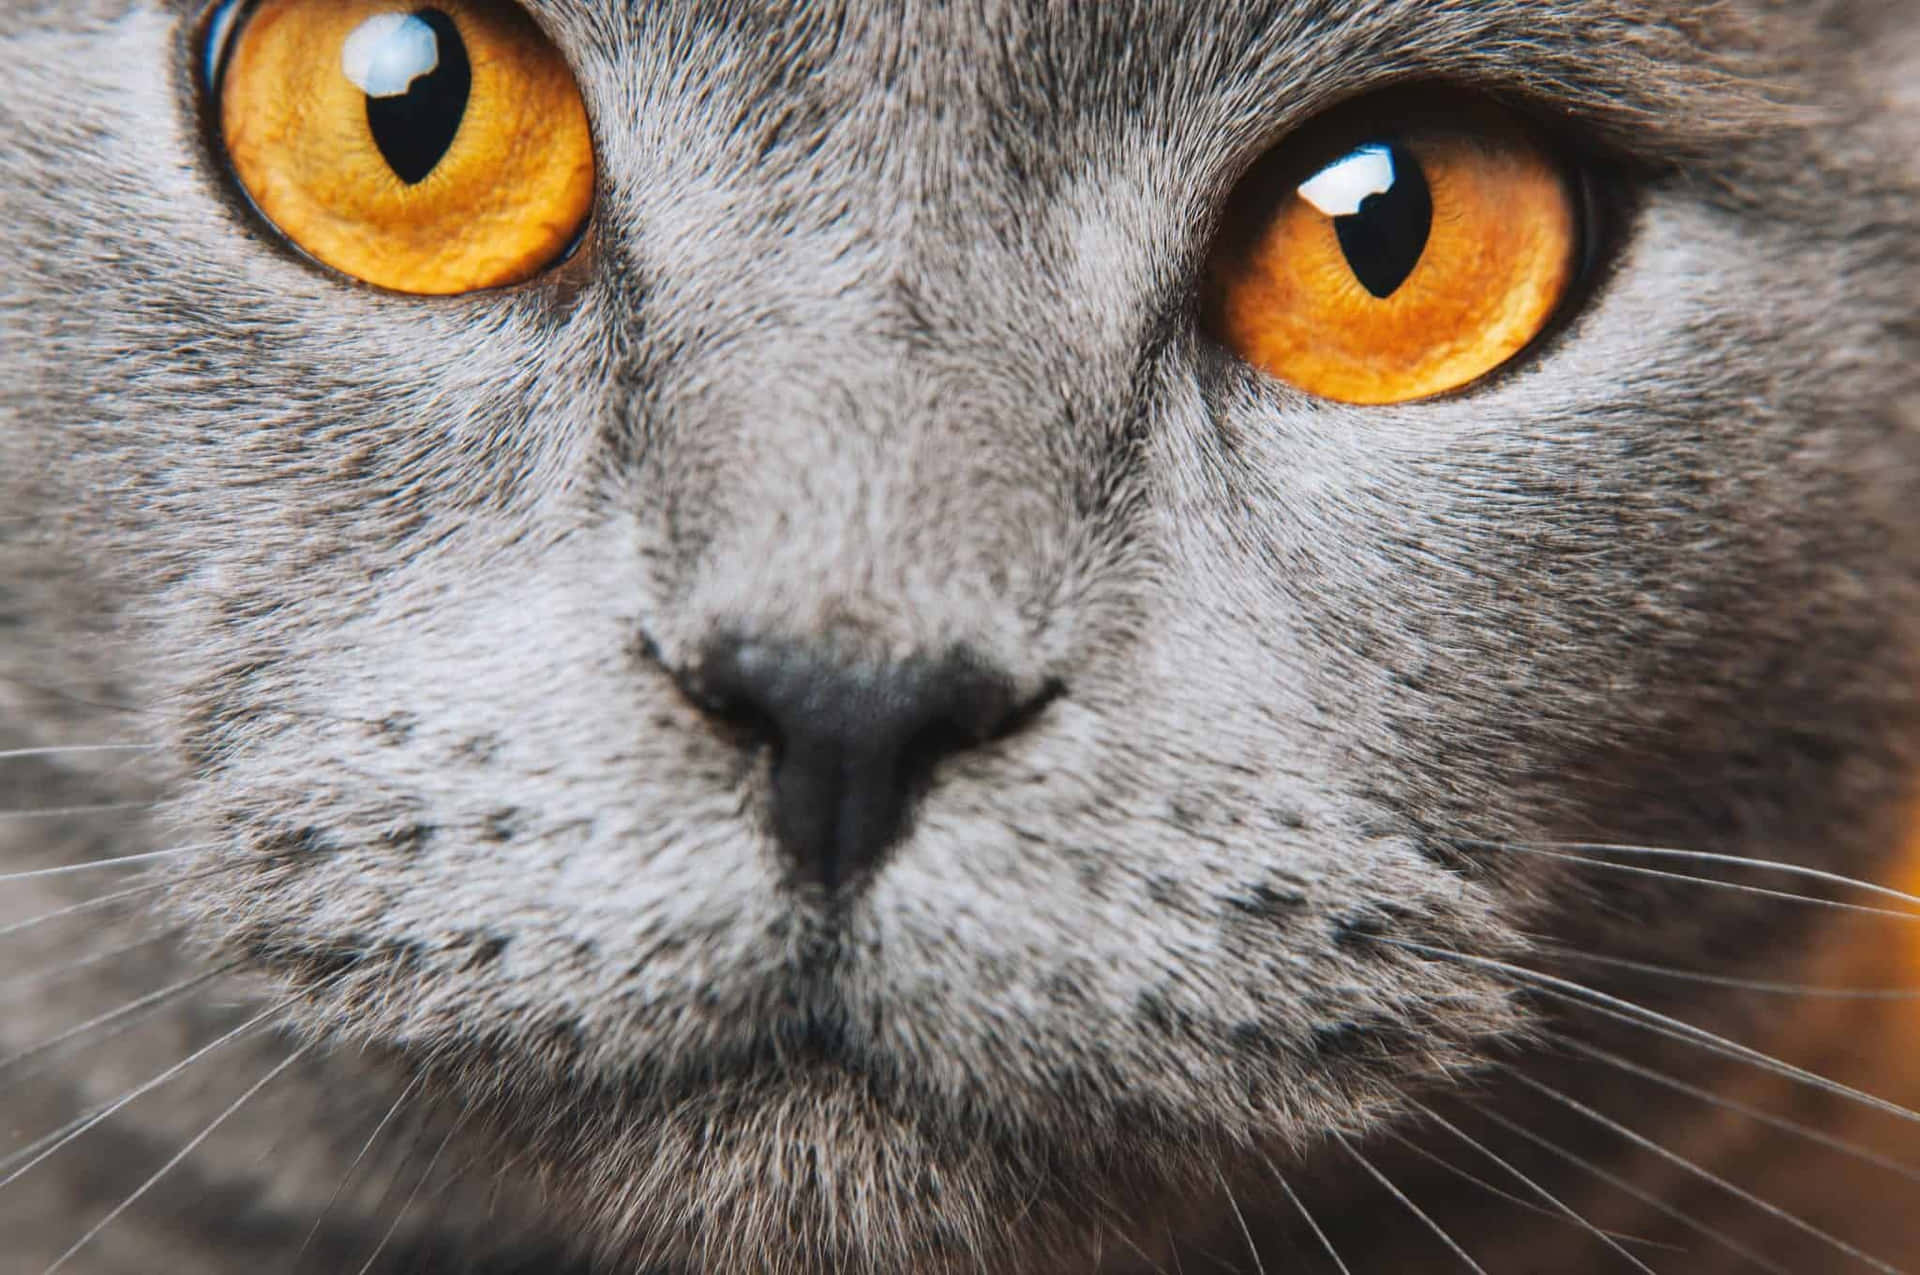 Those Cat Eyes Look Like They're Looking Right into My Soul!